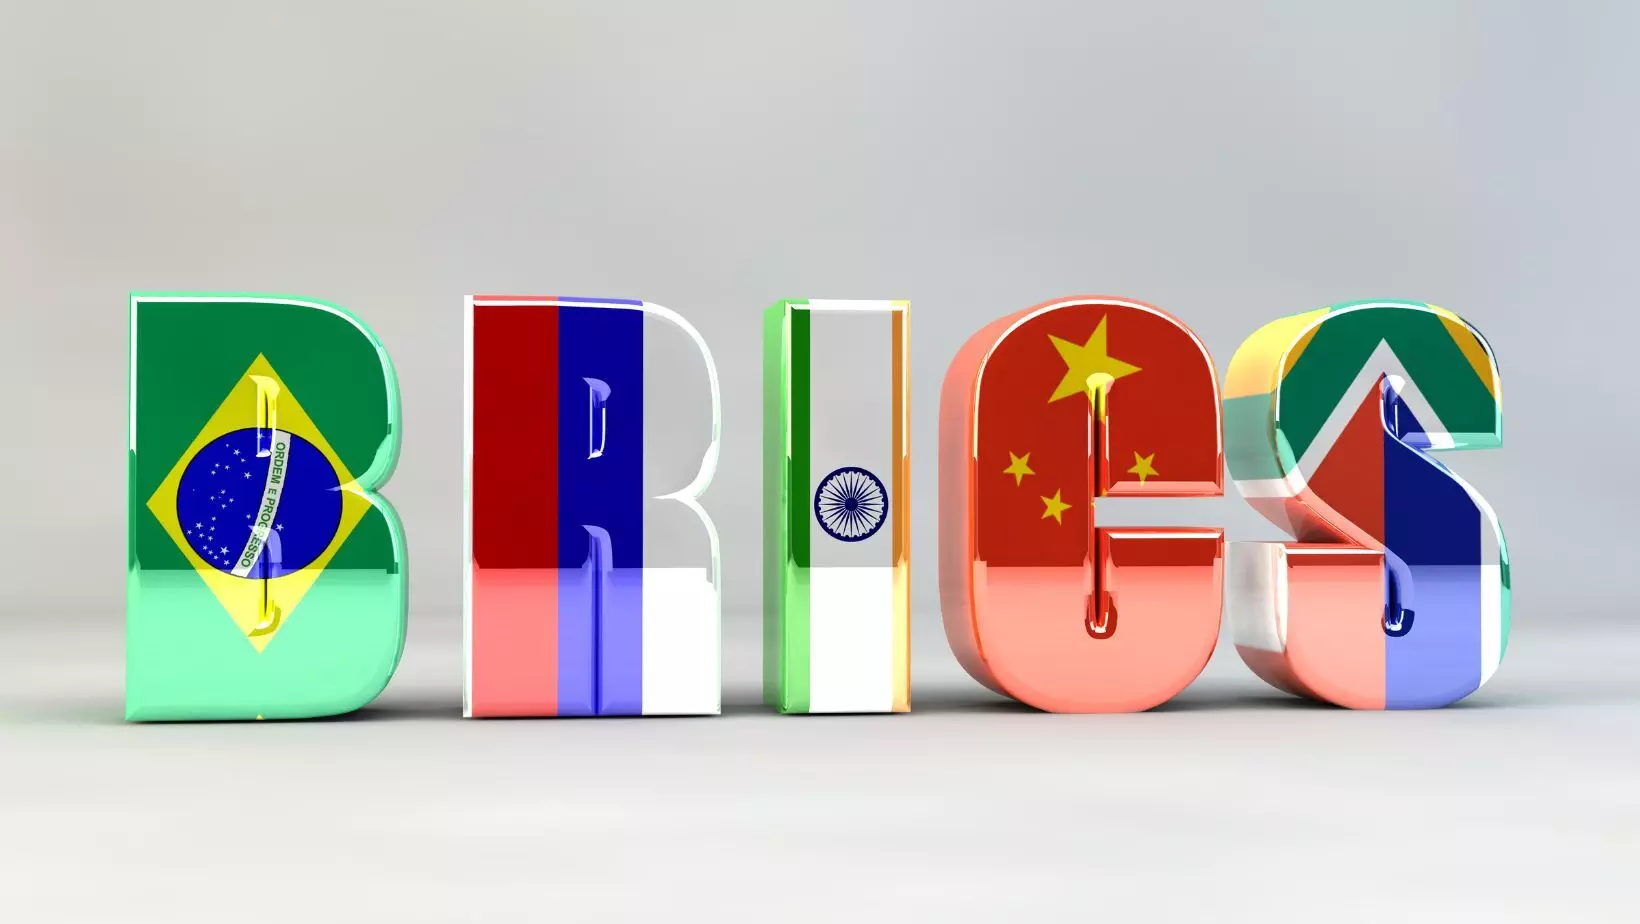 These five countries to join BRICS group